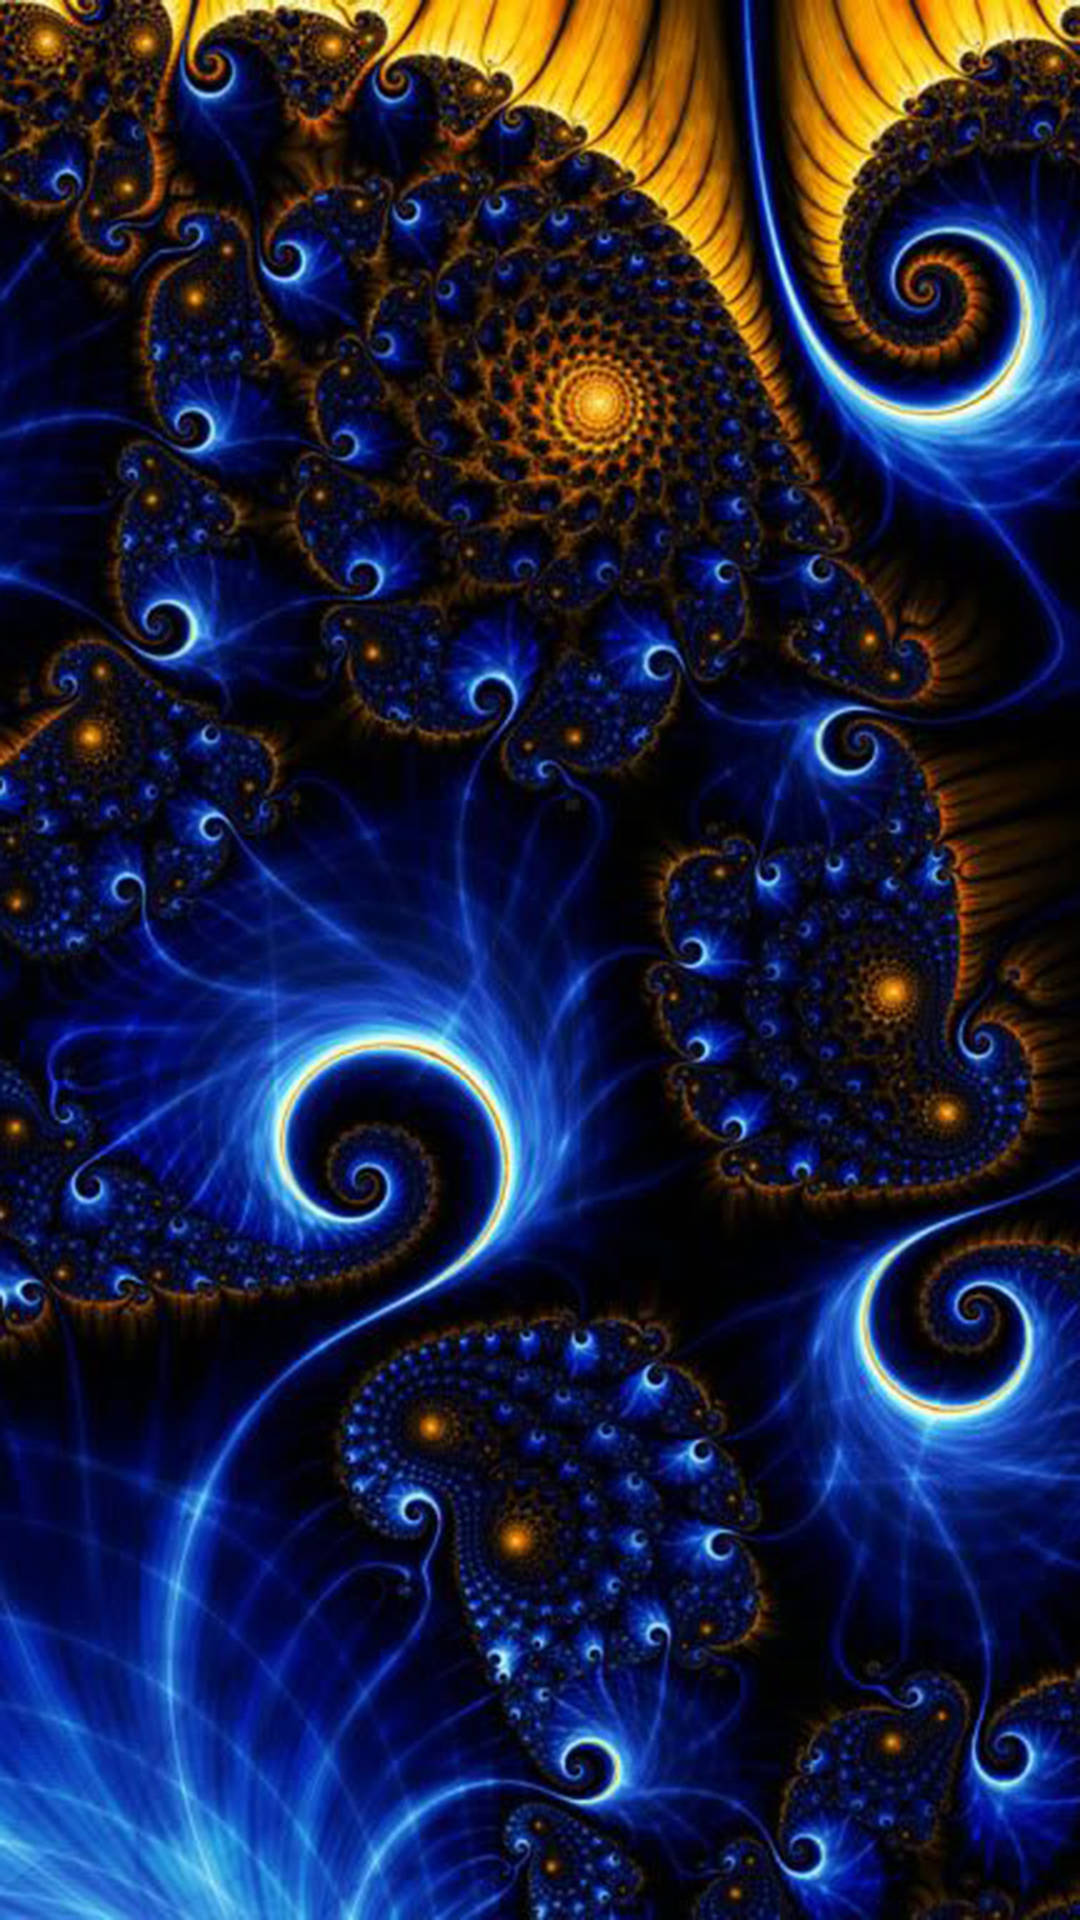 Psychedelic Peacock Spirals Iphone Wallpaper Background